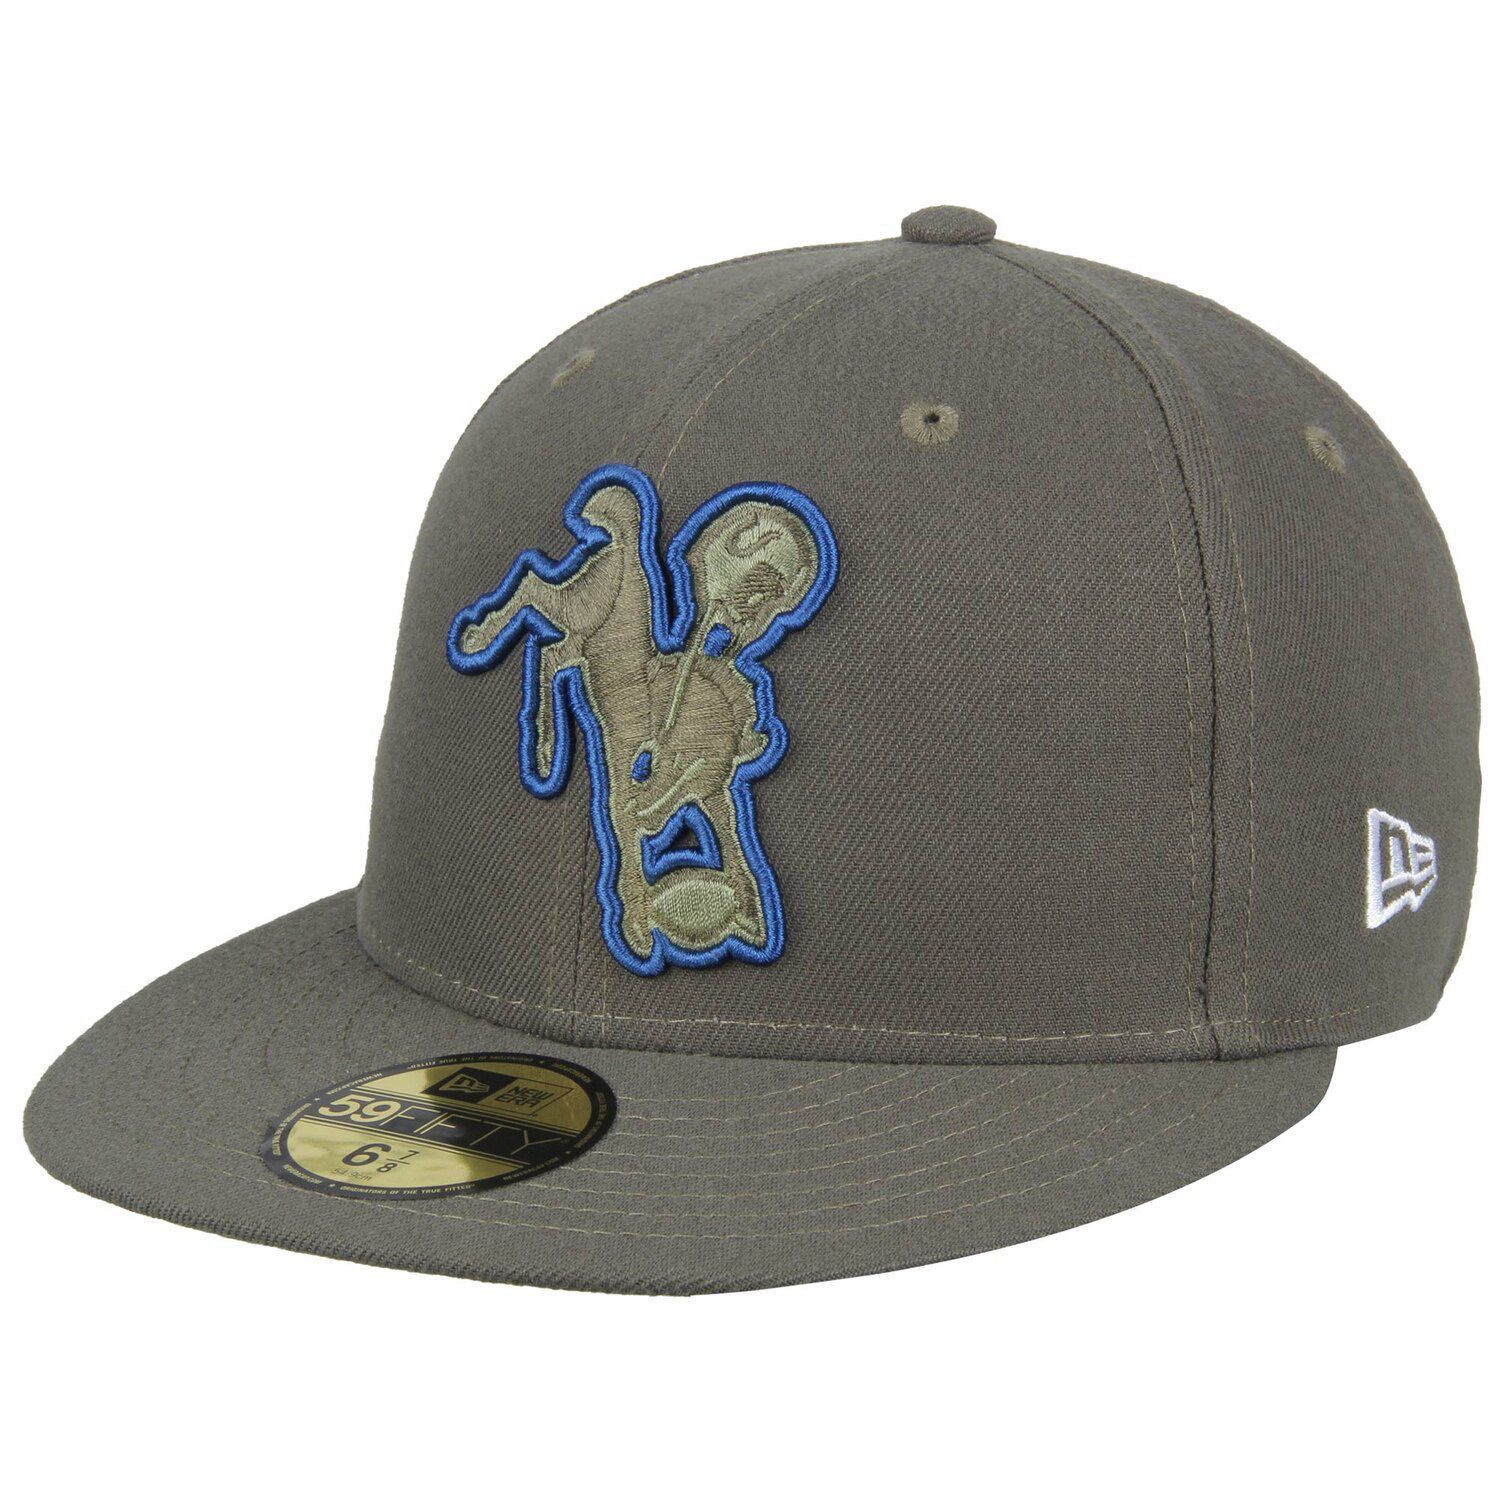 indianapolis colts salute to service hat